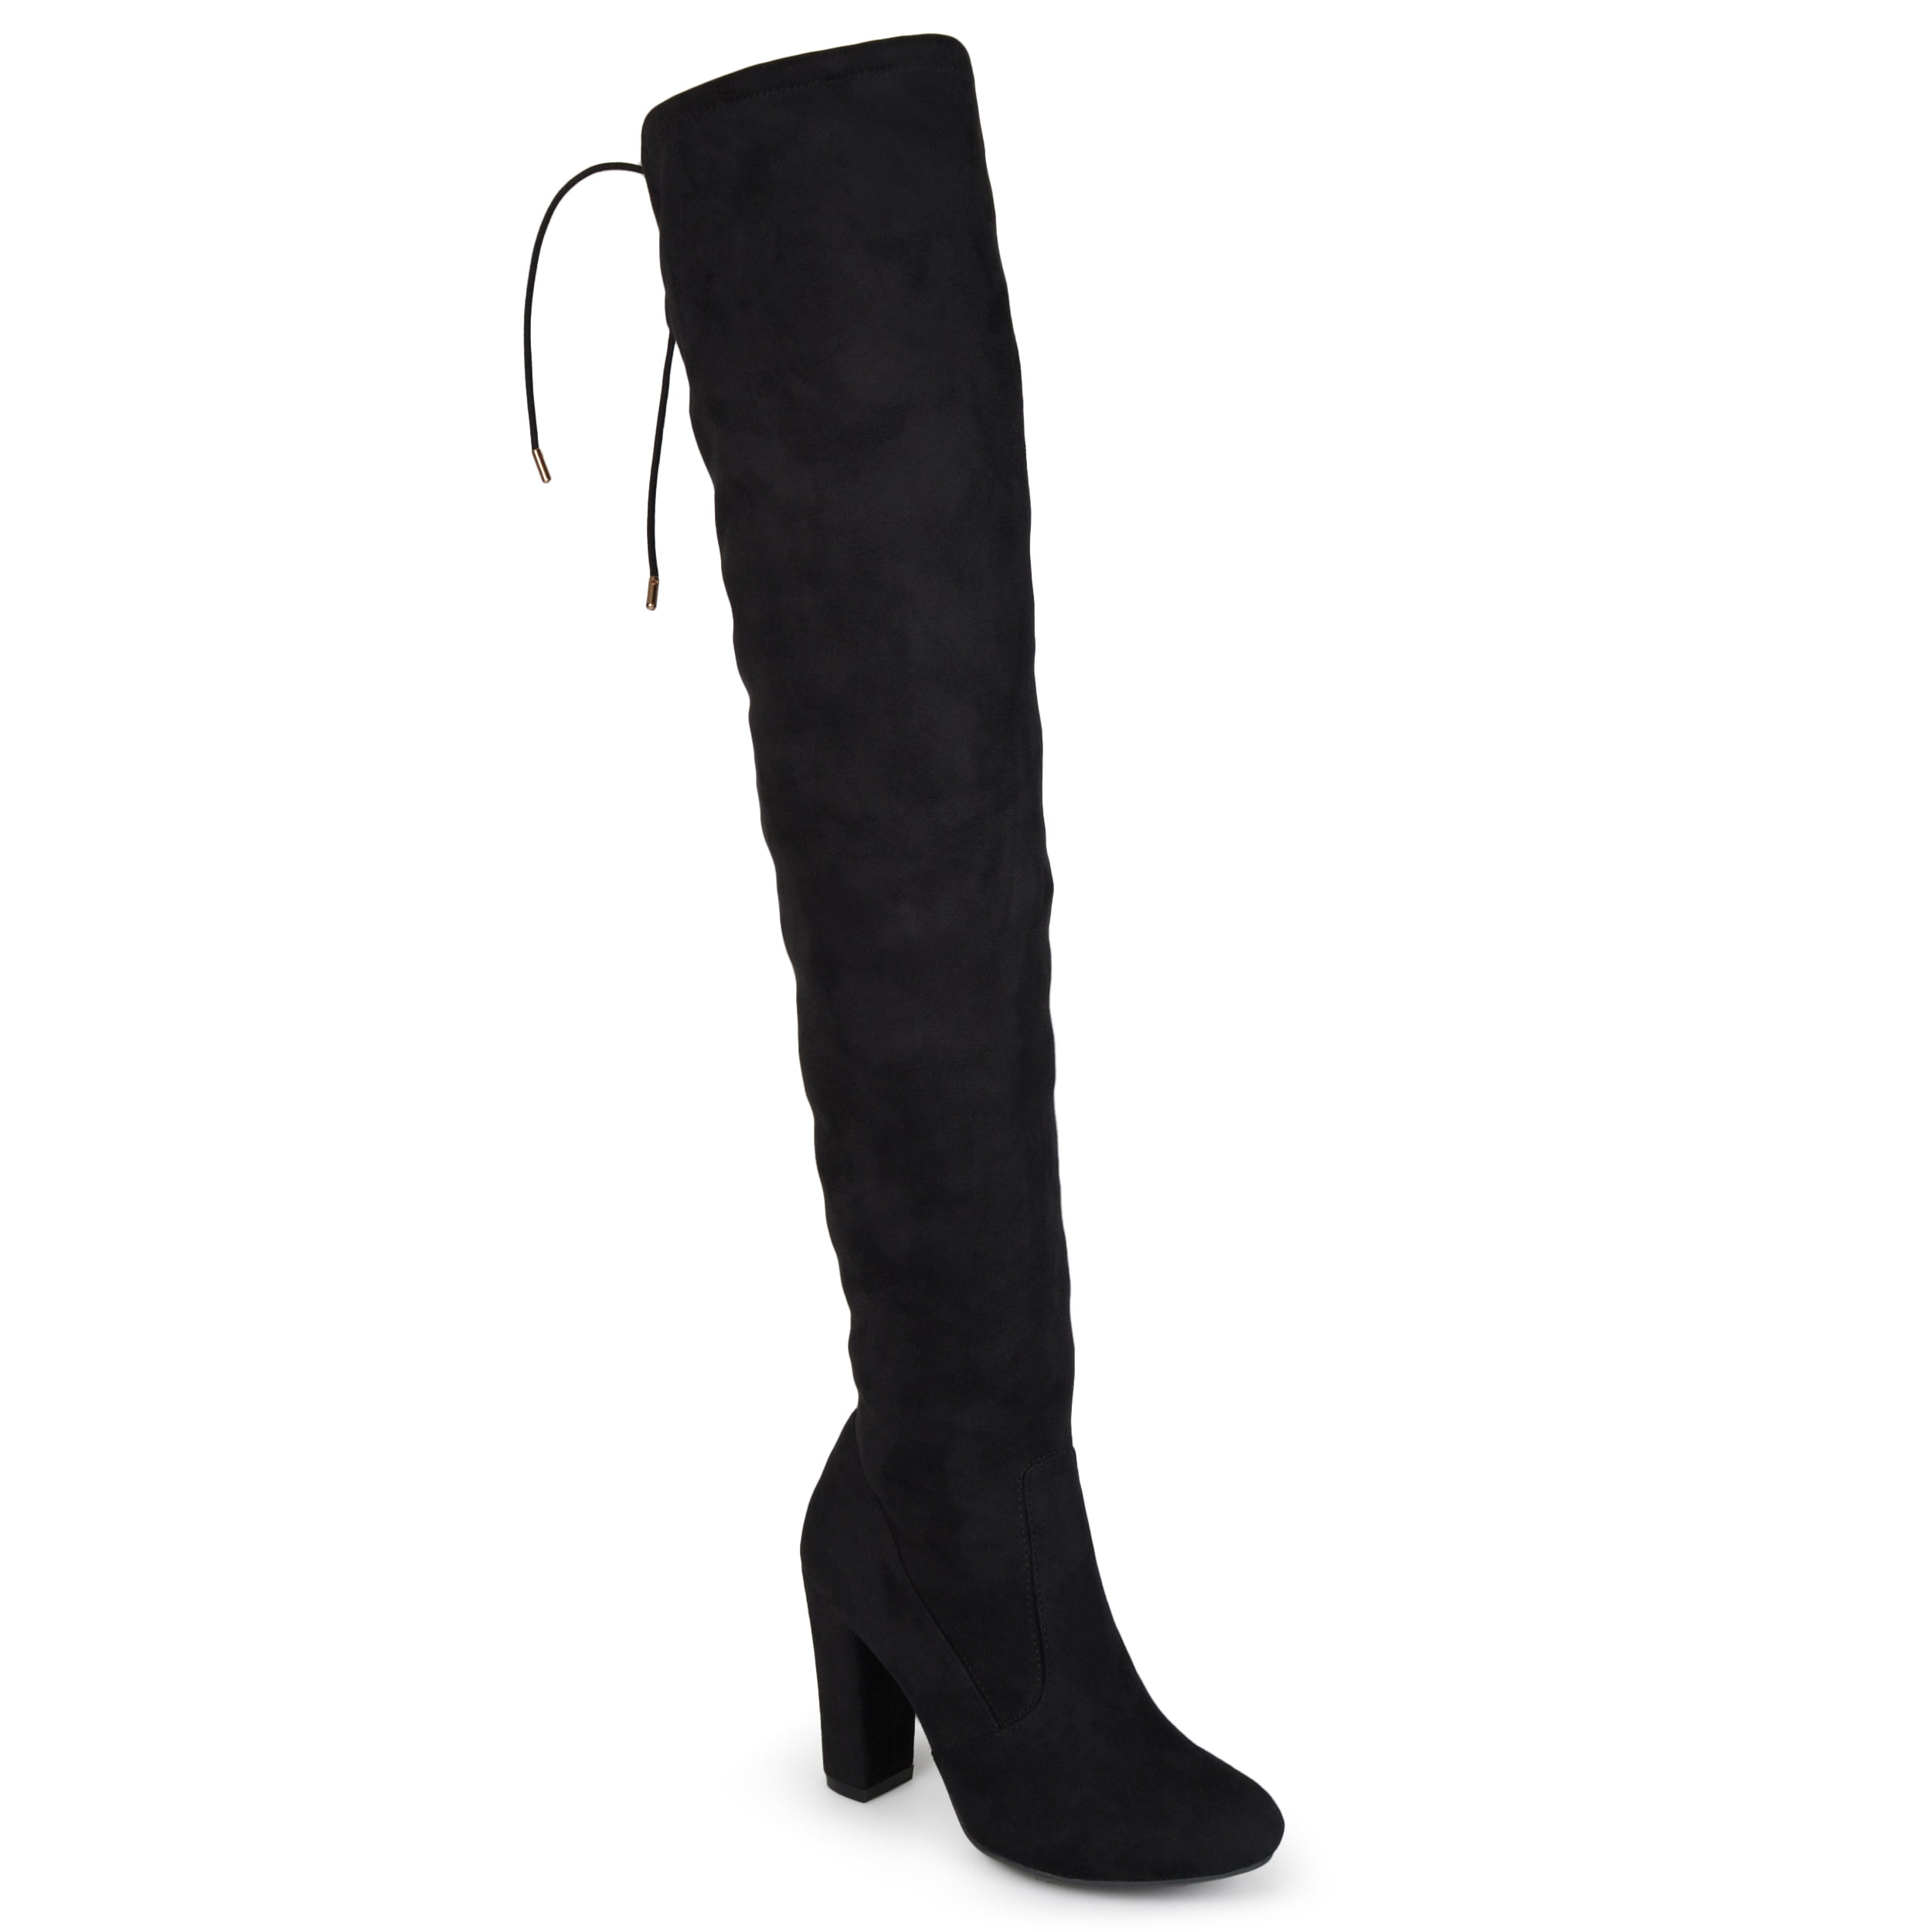 Paw-27 Velvet Stretchy Pointy Toe Thigh High Over Knee Block High Heel Boots 